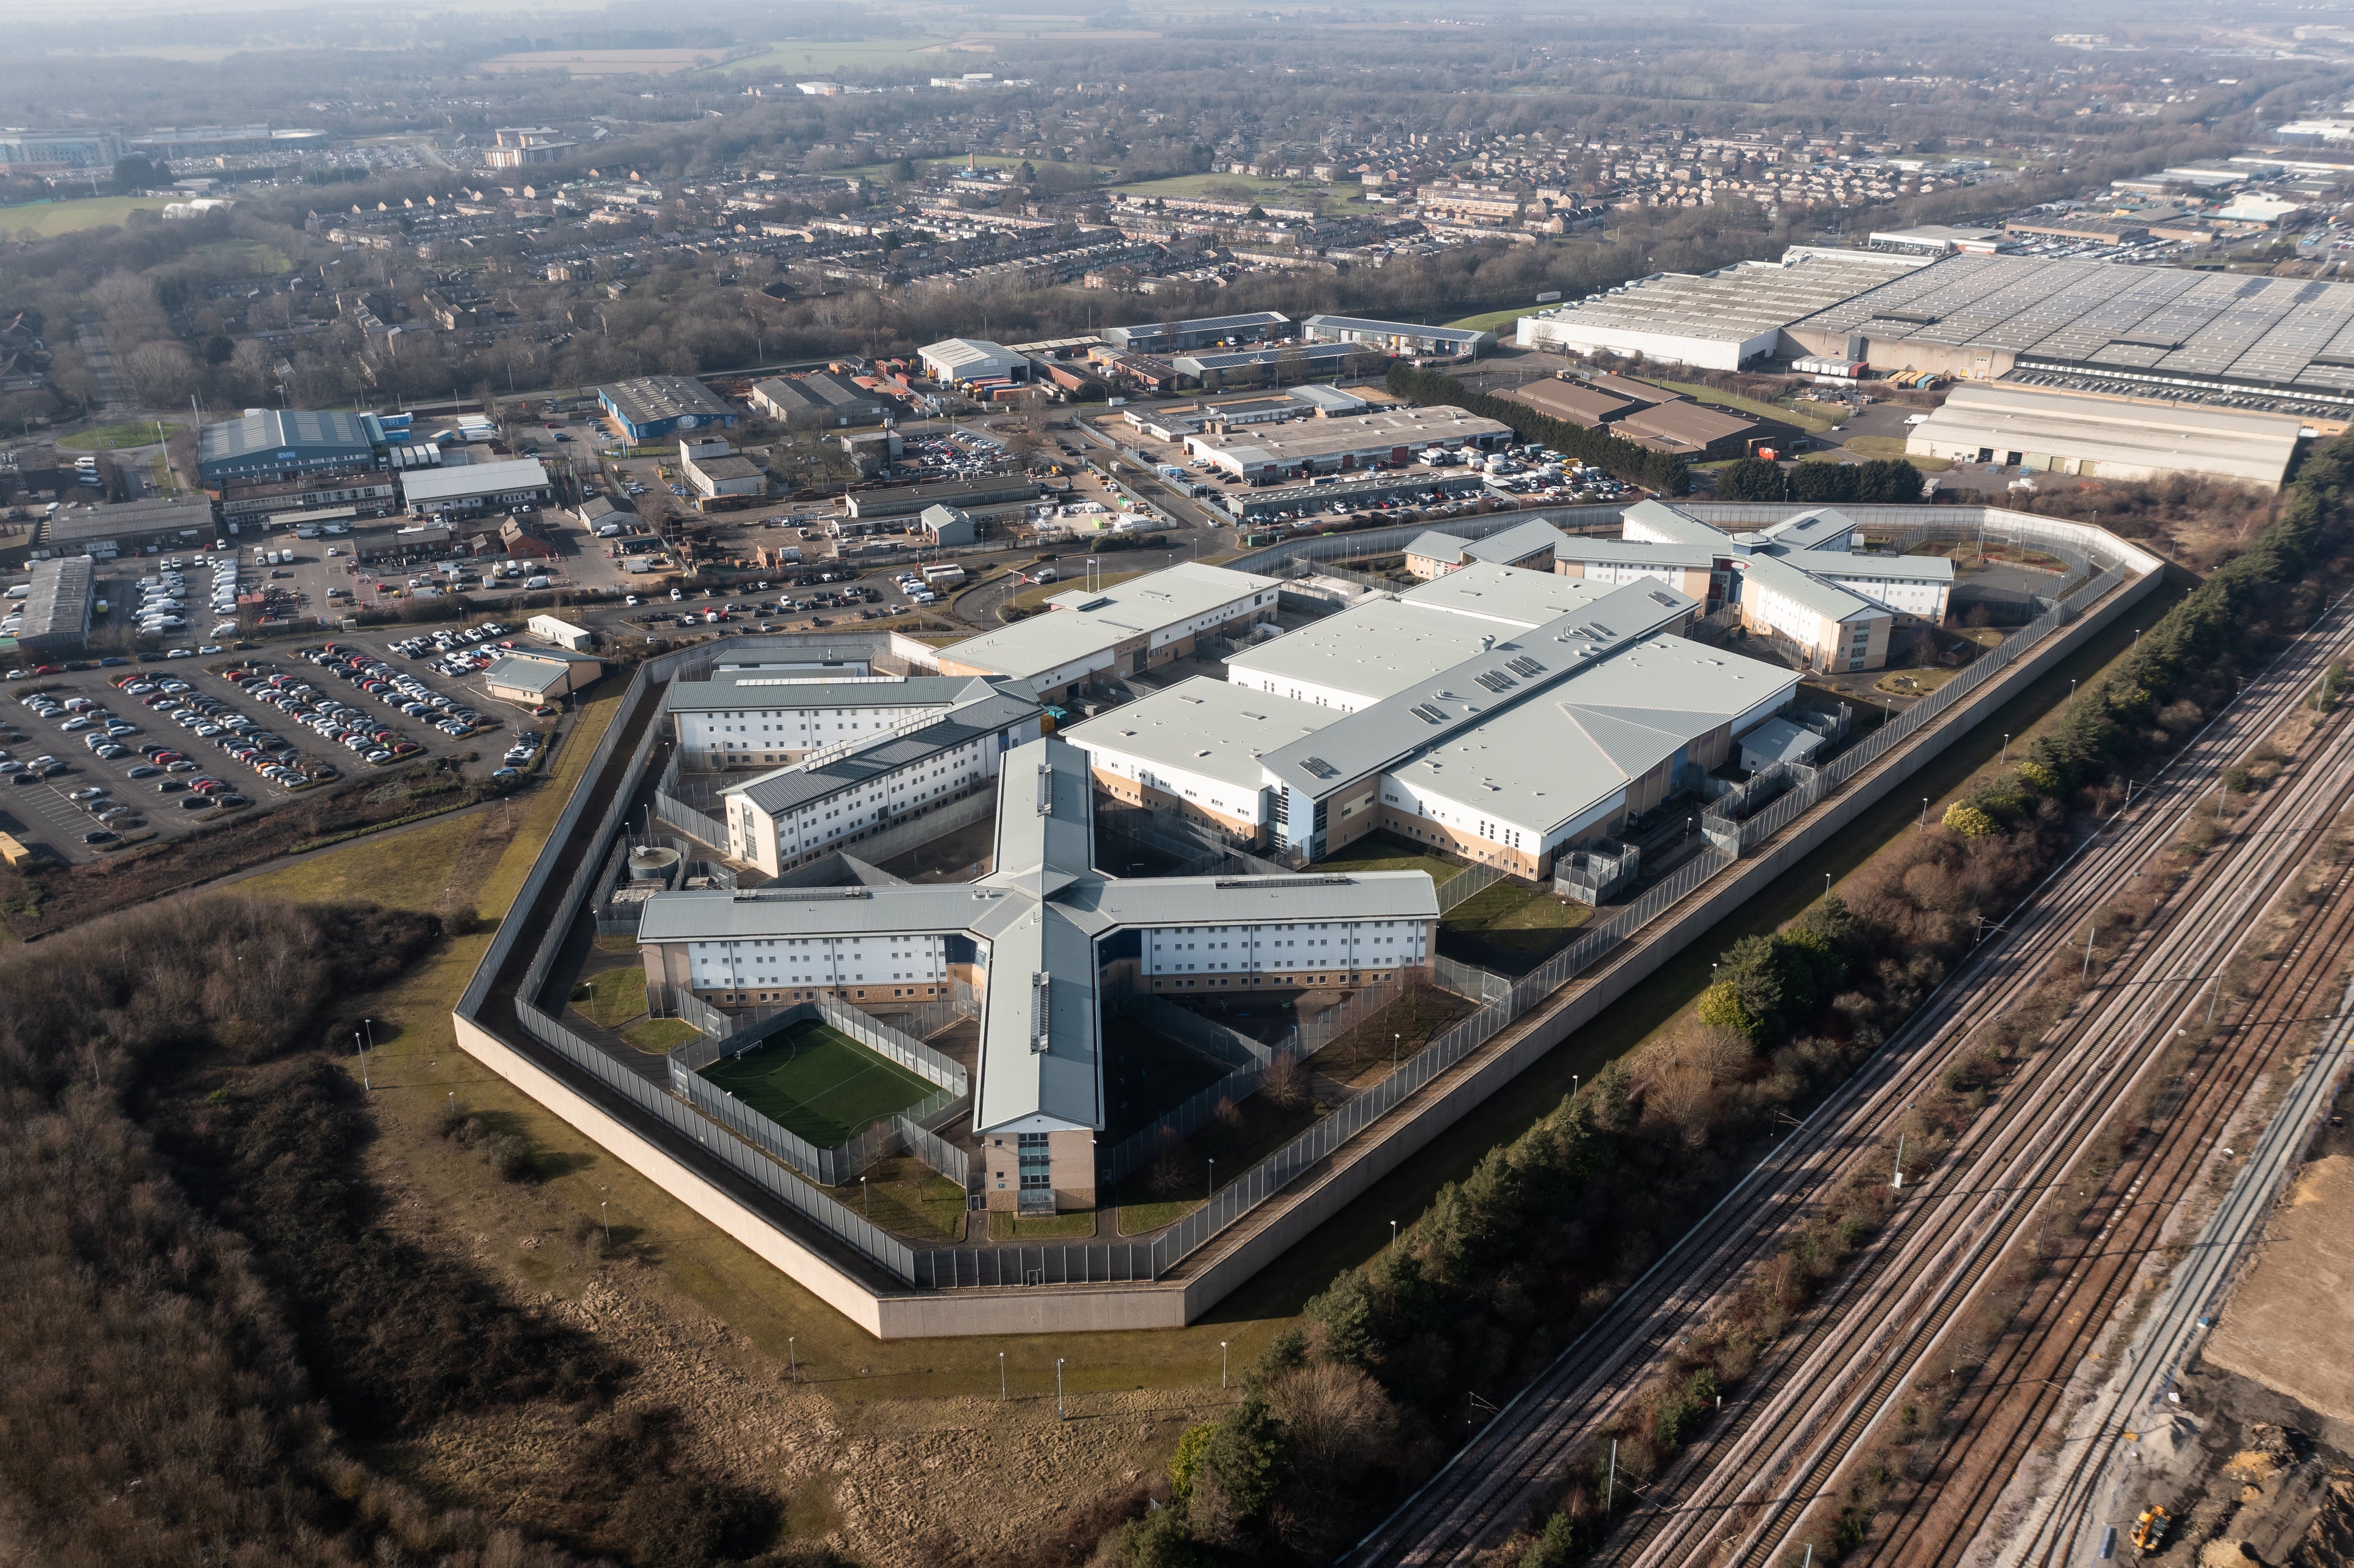 An aerial view of HMP YOI Peterborough, a category B prison for men and women, which has a capacity for 840 people